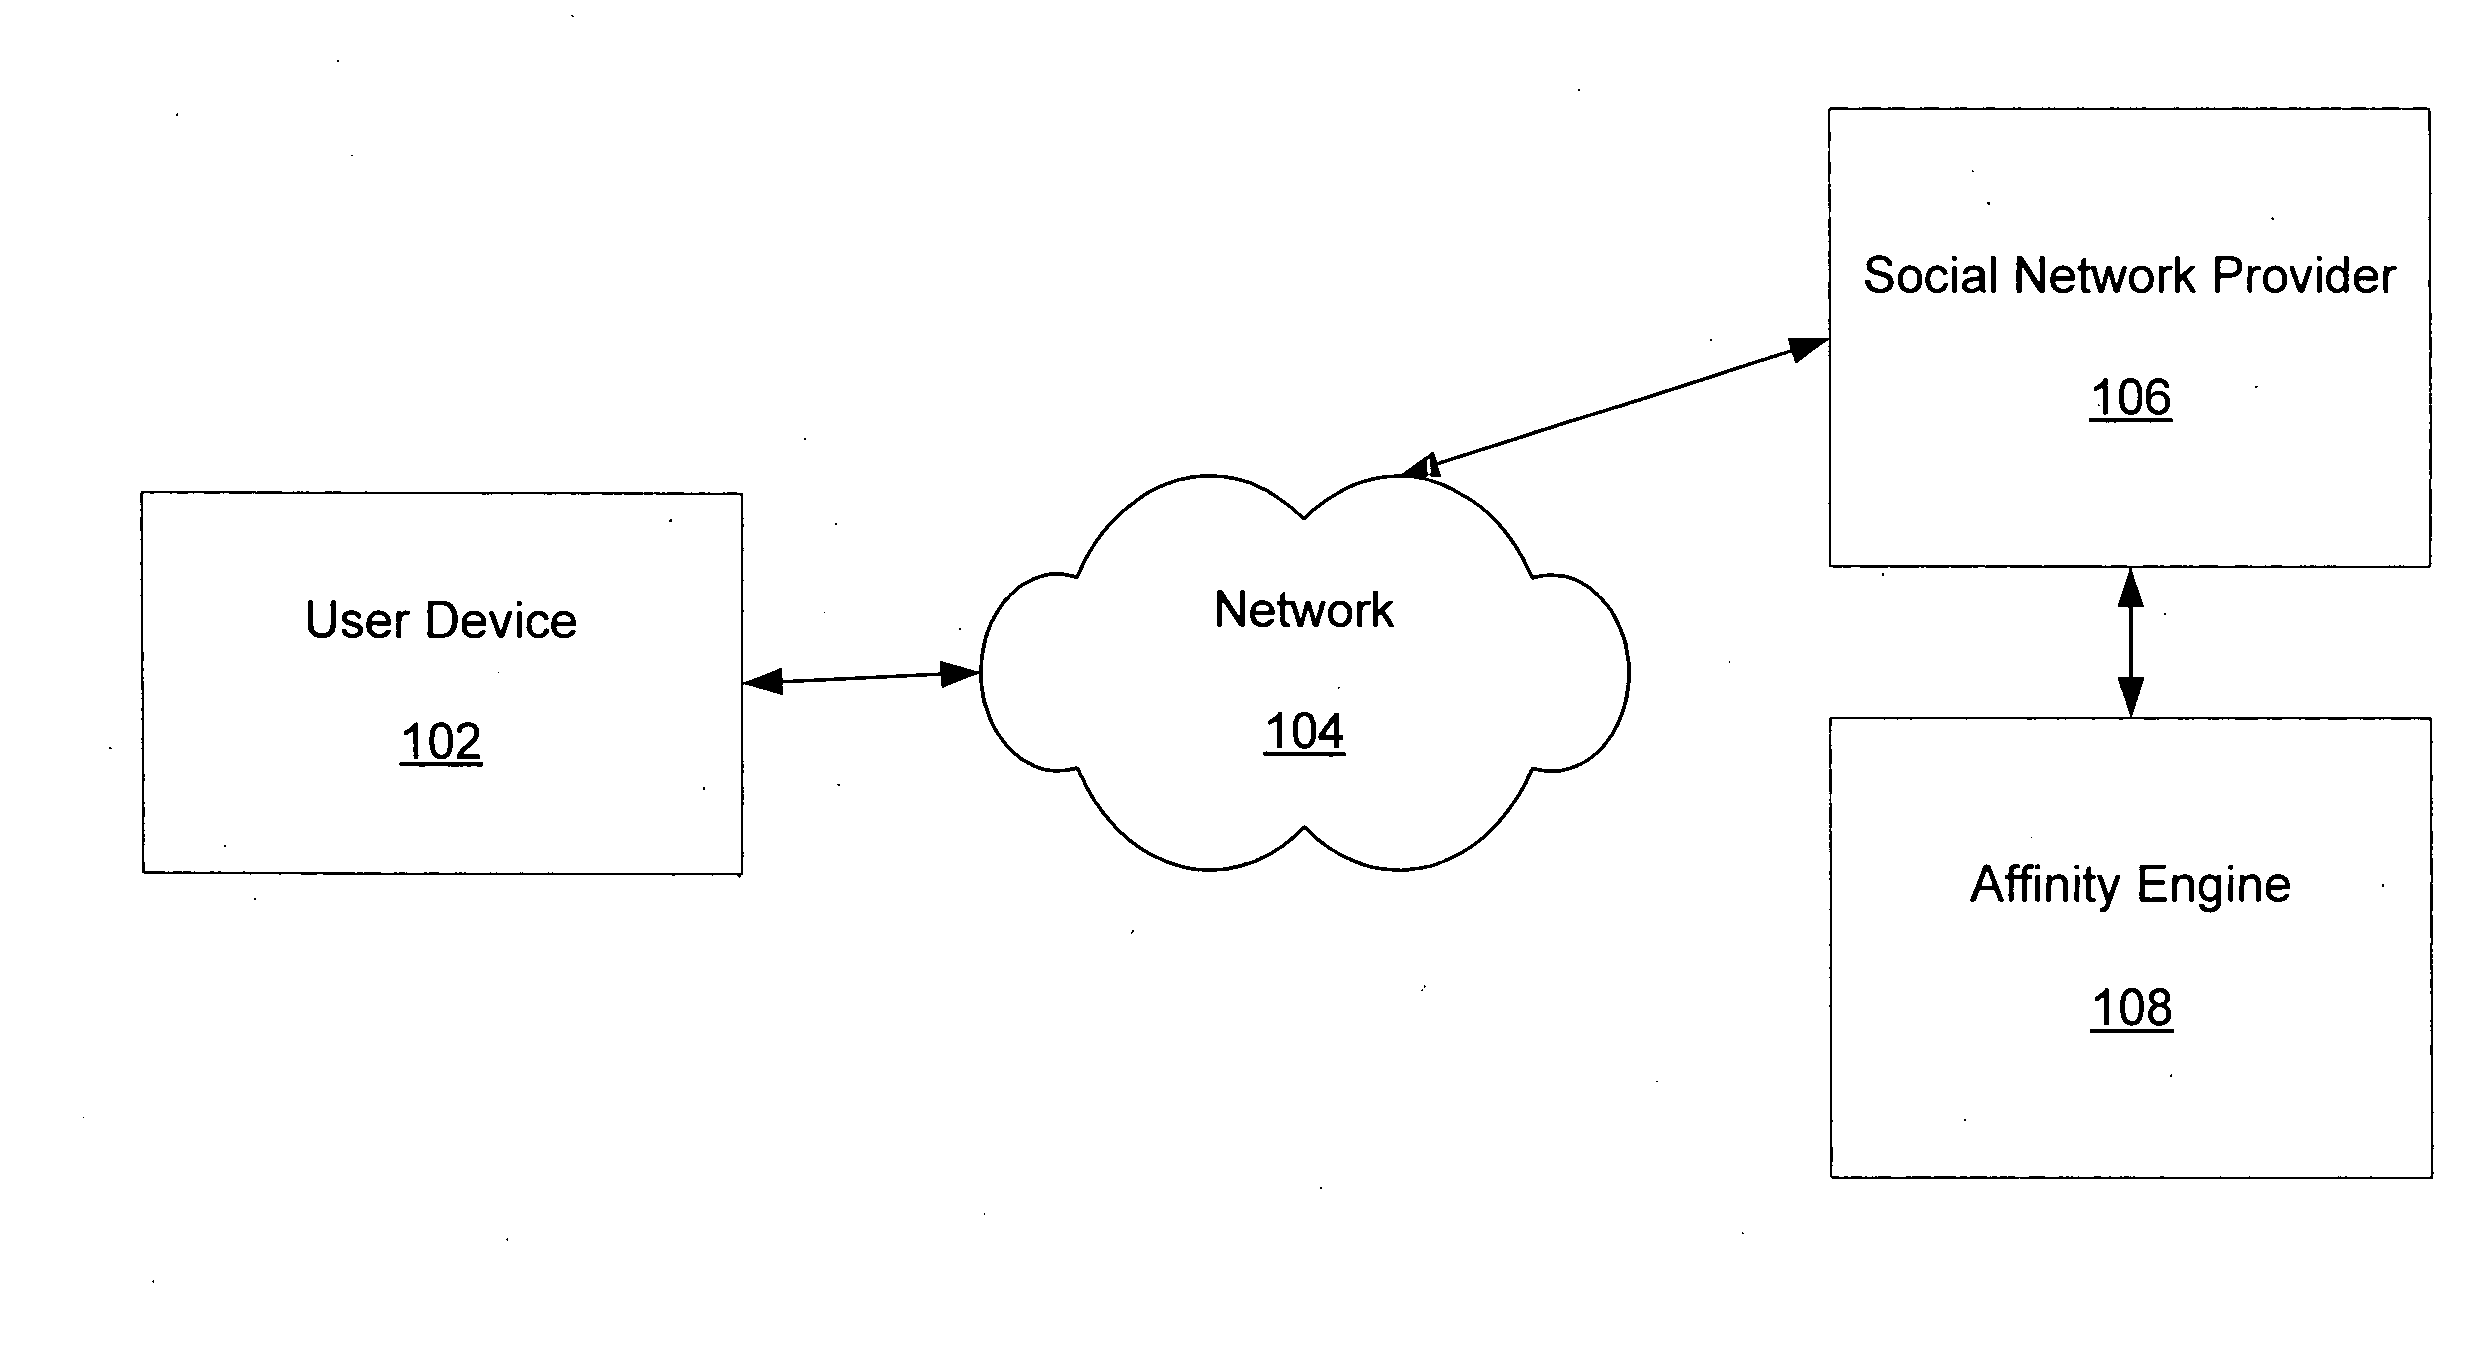 Systems and methods for measuring user affinity in a social network environment